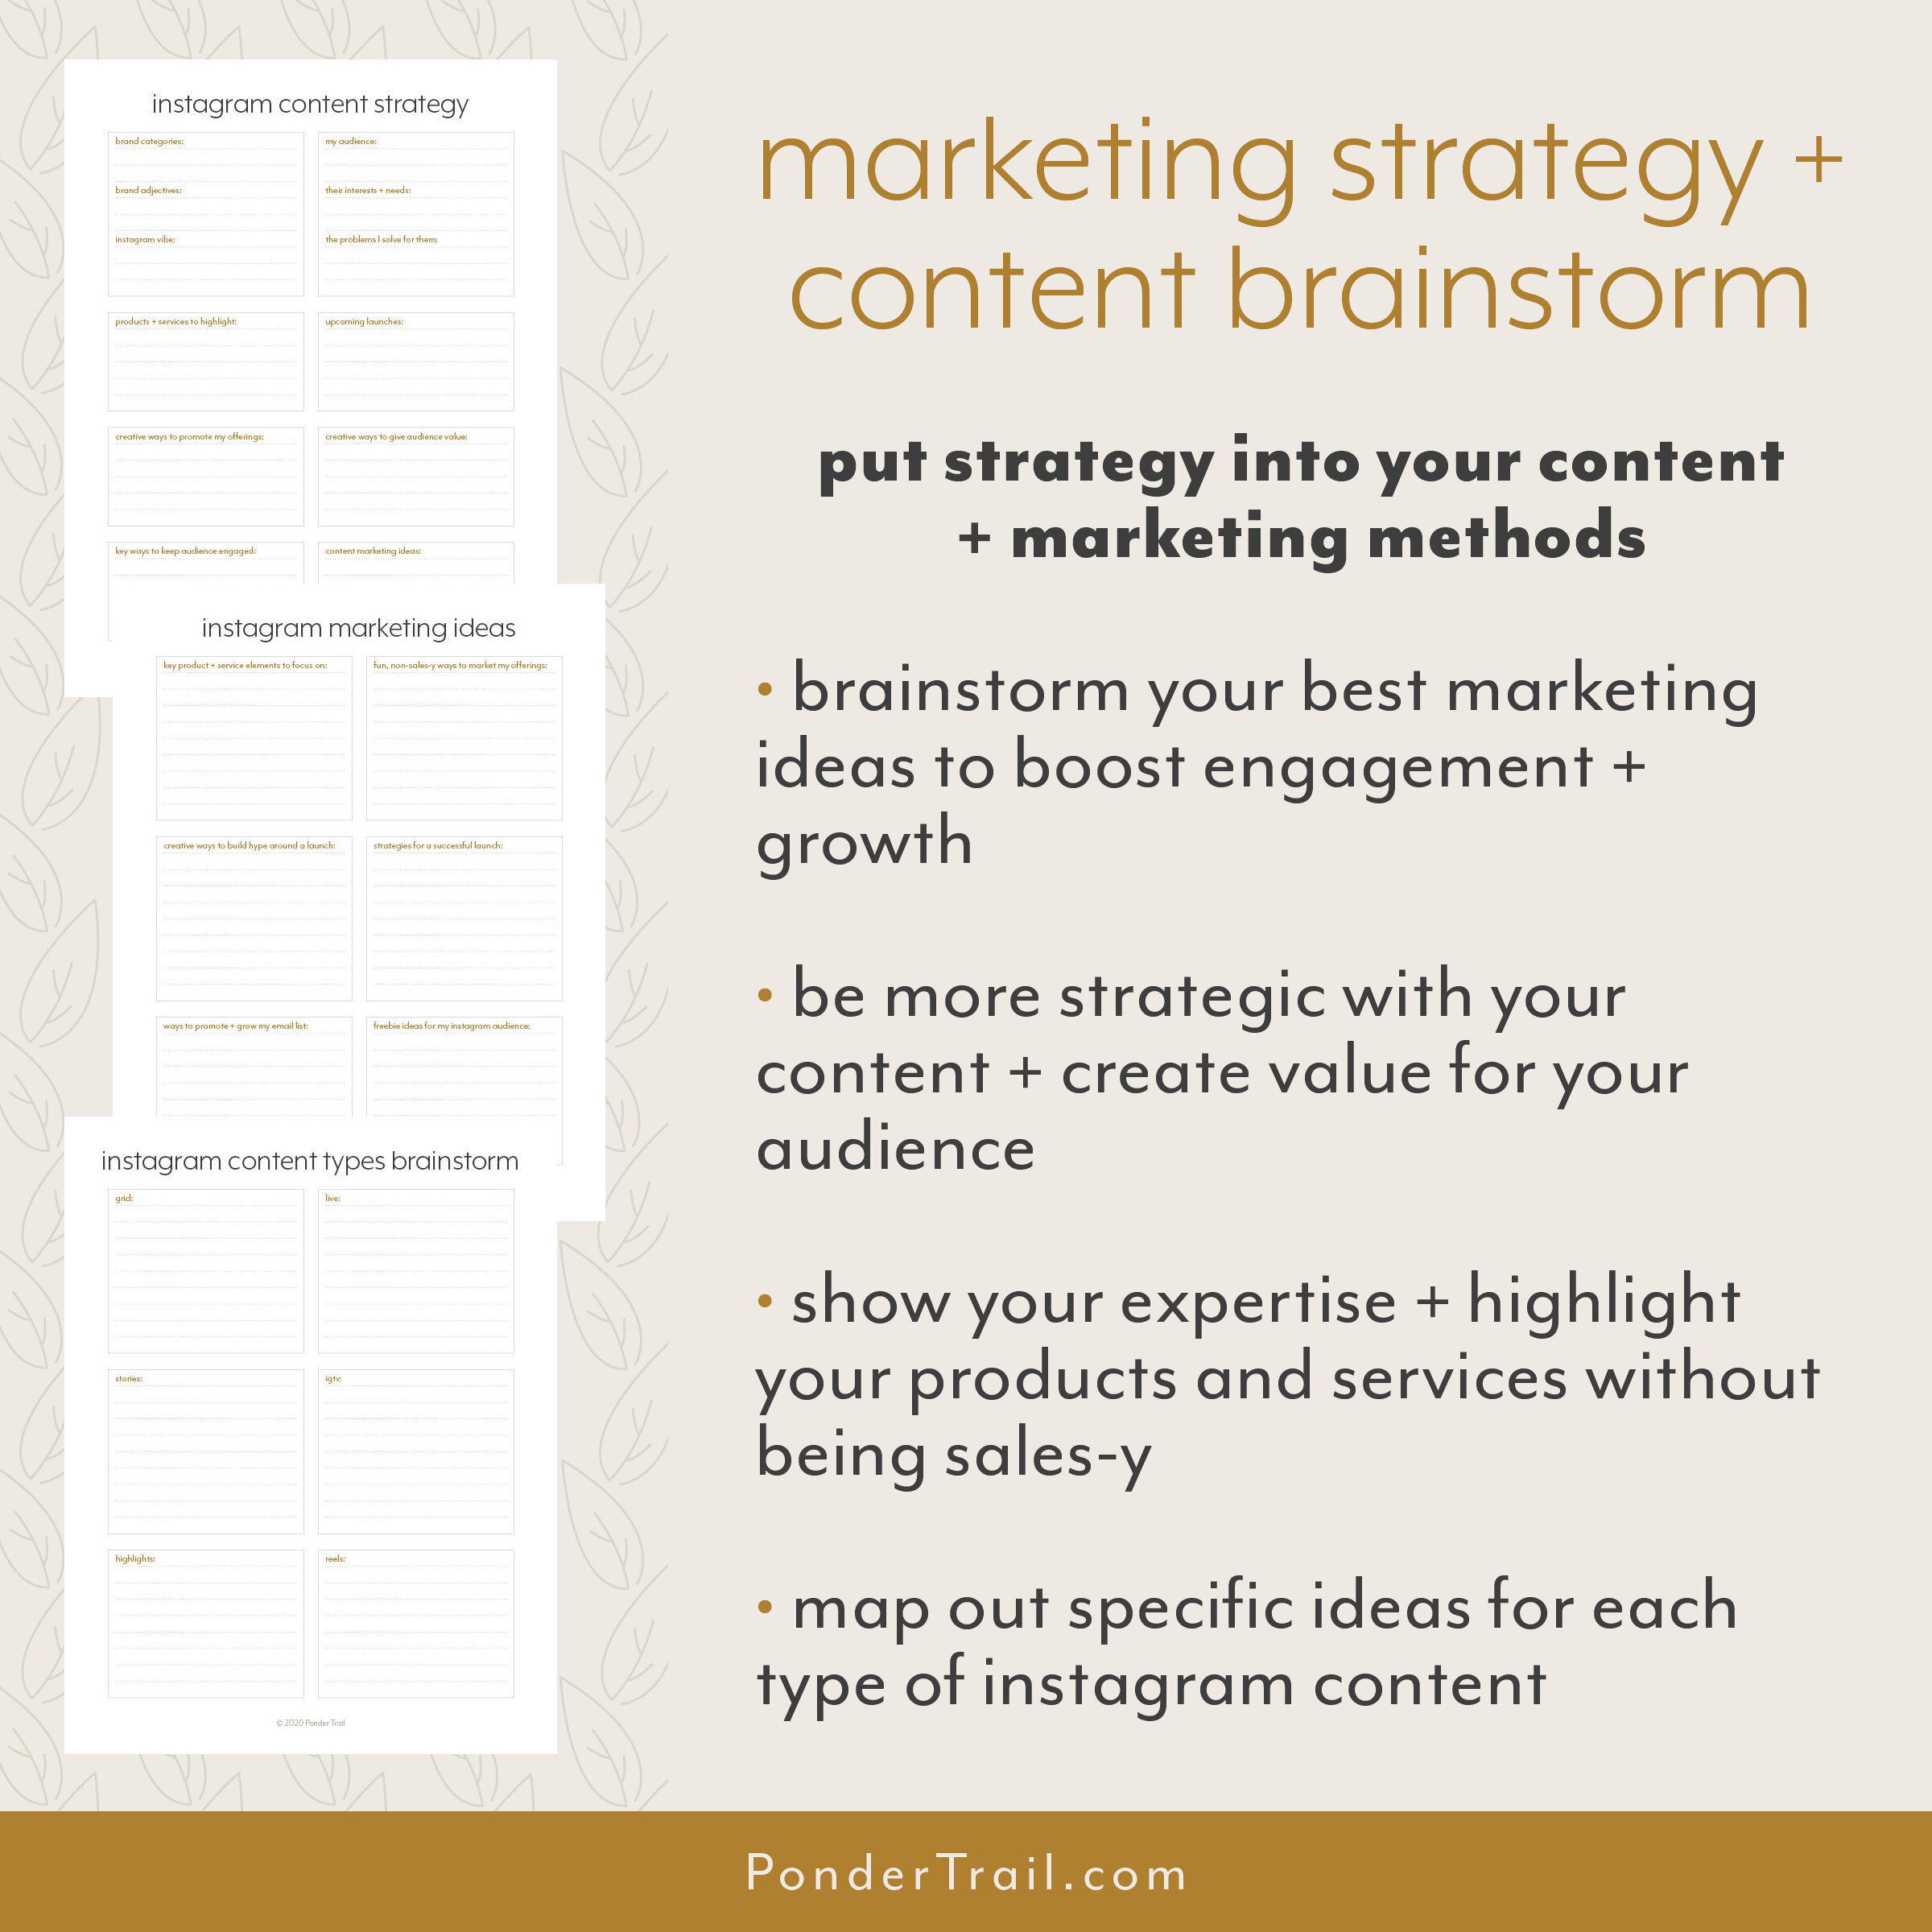 Instagram Marketing Strategy Content BrainstormInstagram Marketing Strategy Content Brainstorm.jpg